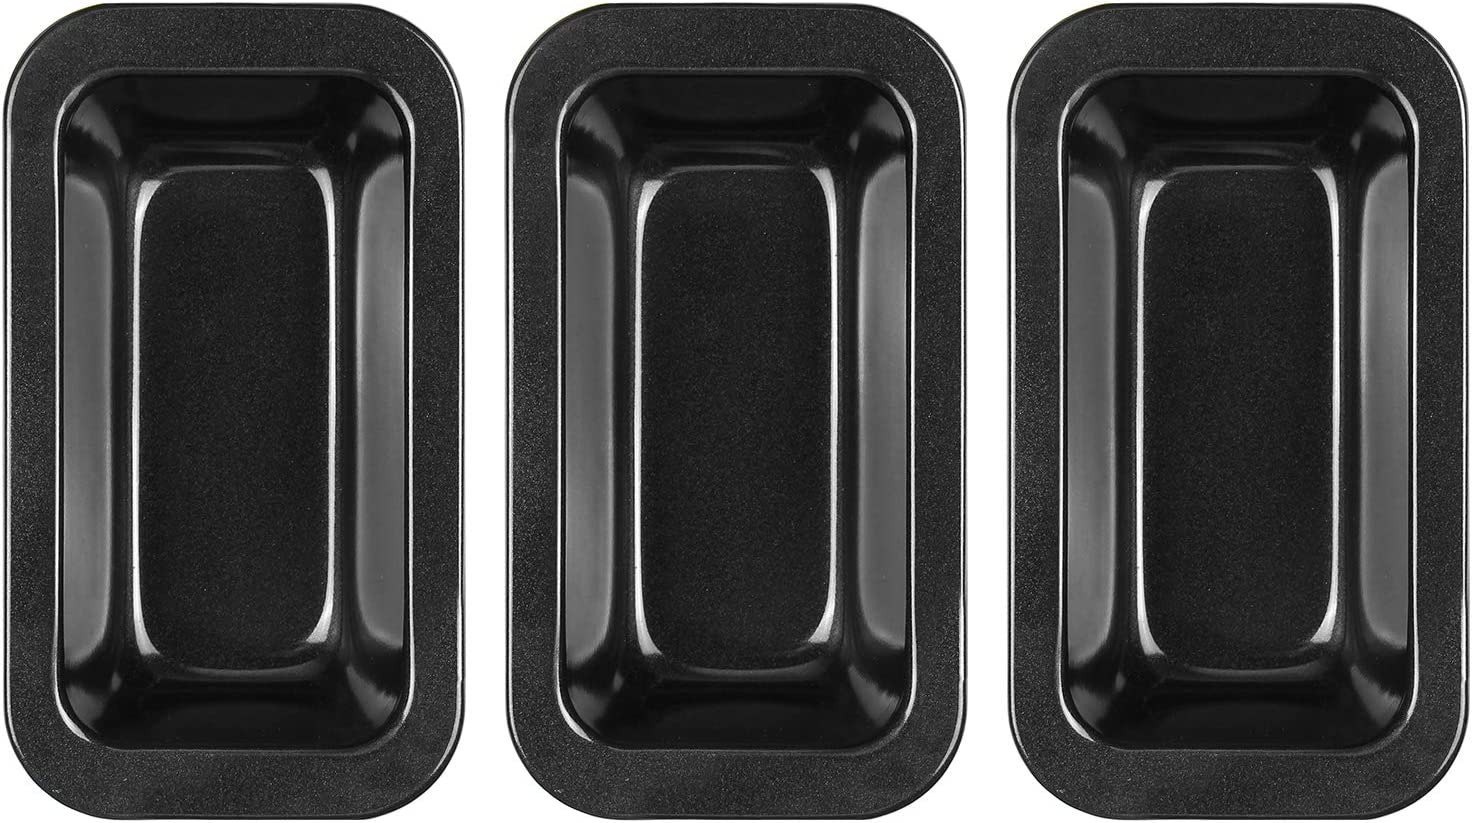 HONGBAKE Mini Loaf Pan for Baking Bread, 6 x 3.3 x 2 In Nonstick Small –  JandWShippingGroup